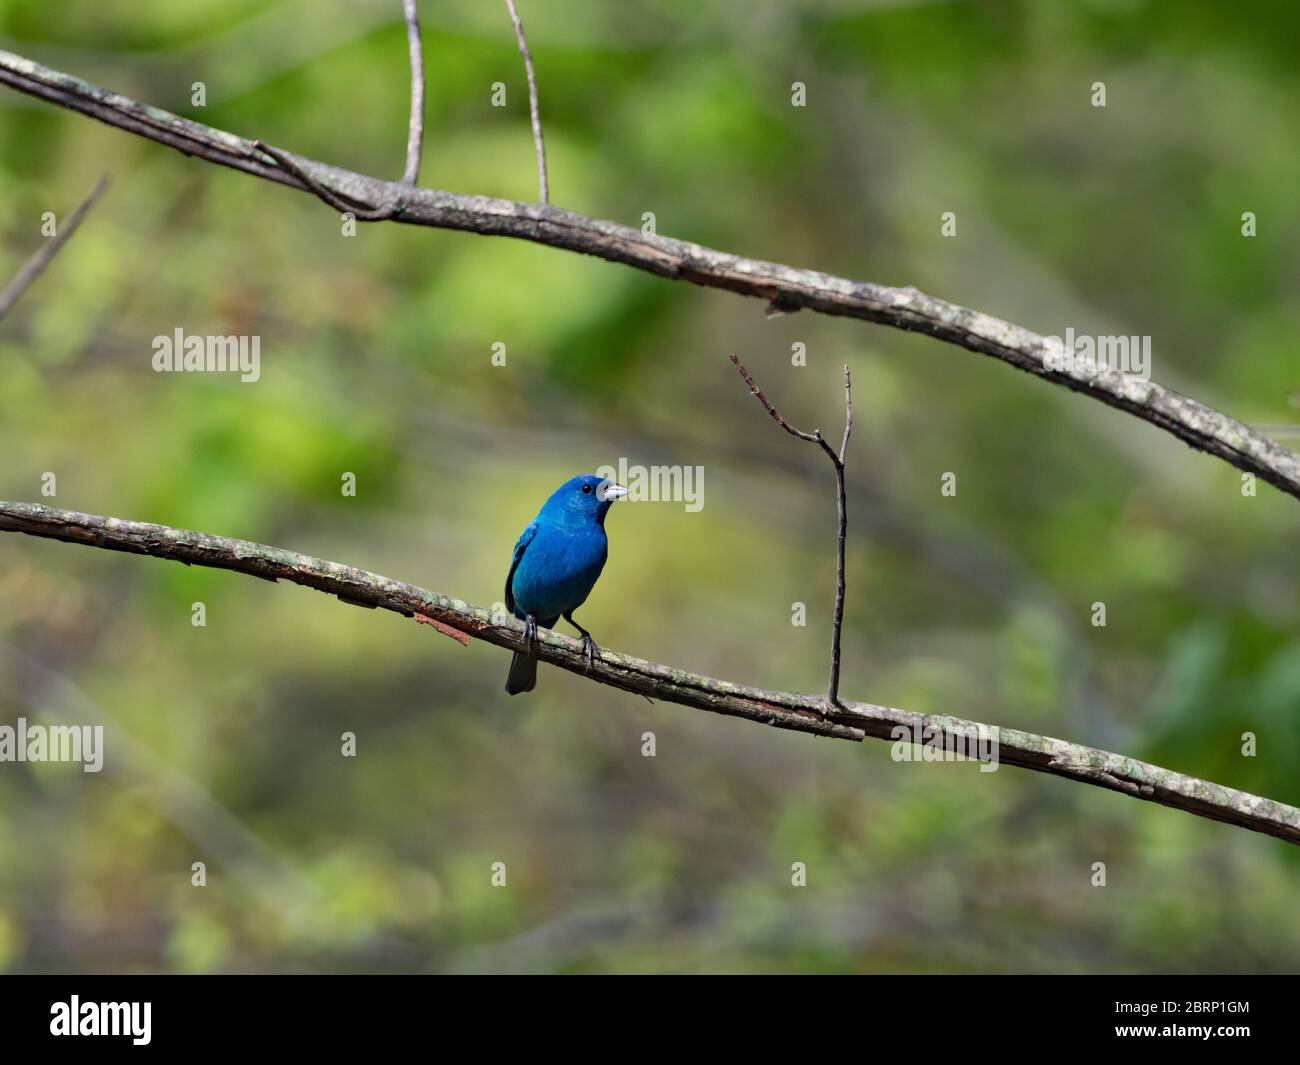 Indigo bunting, Passerina cyanea, one of the most stunningly colored birds in north america Stock Photo